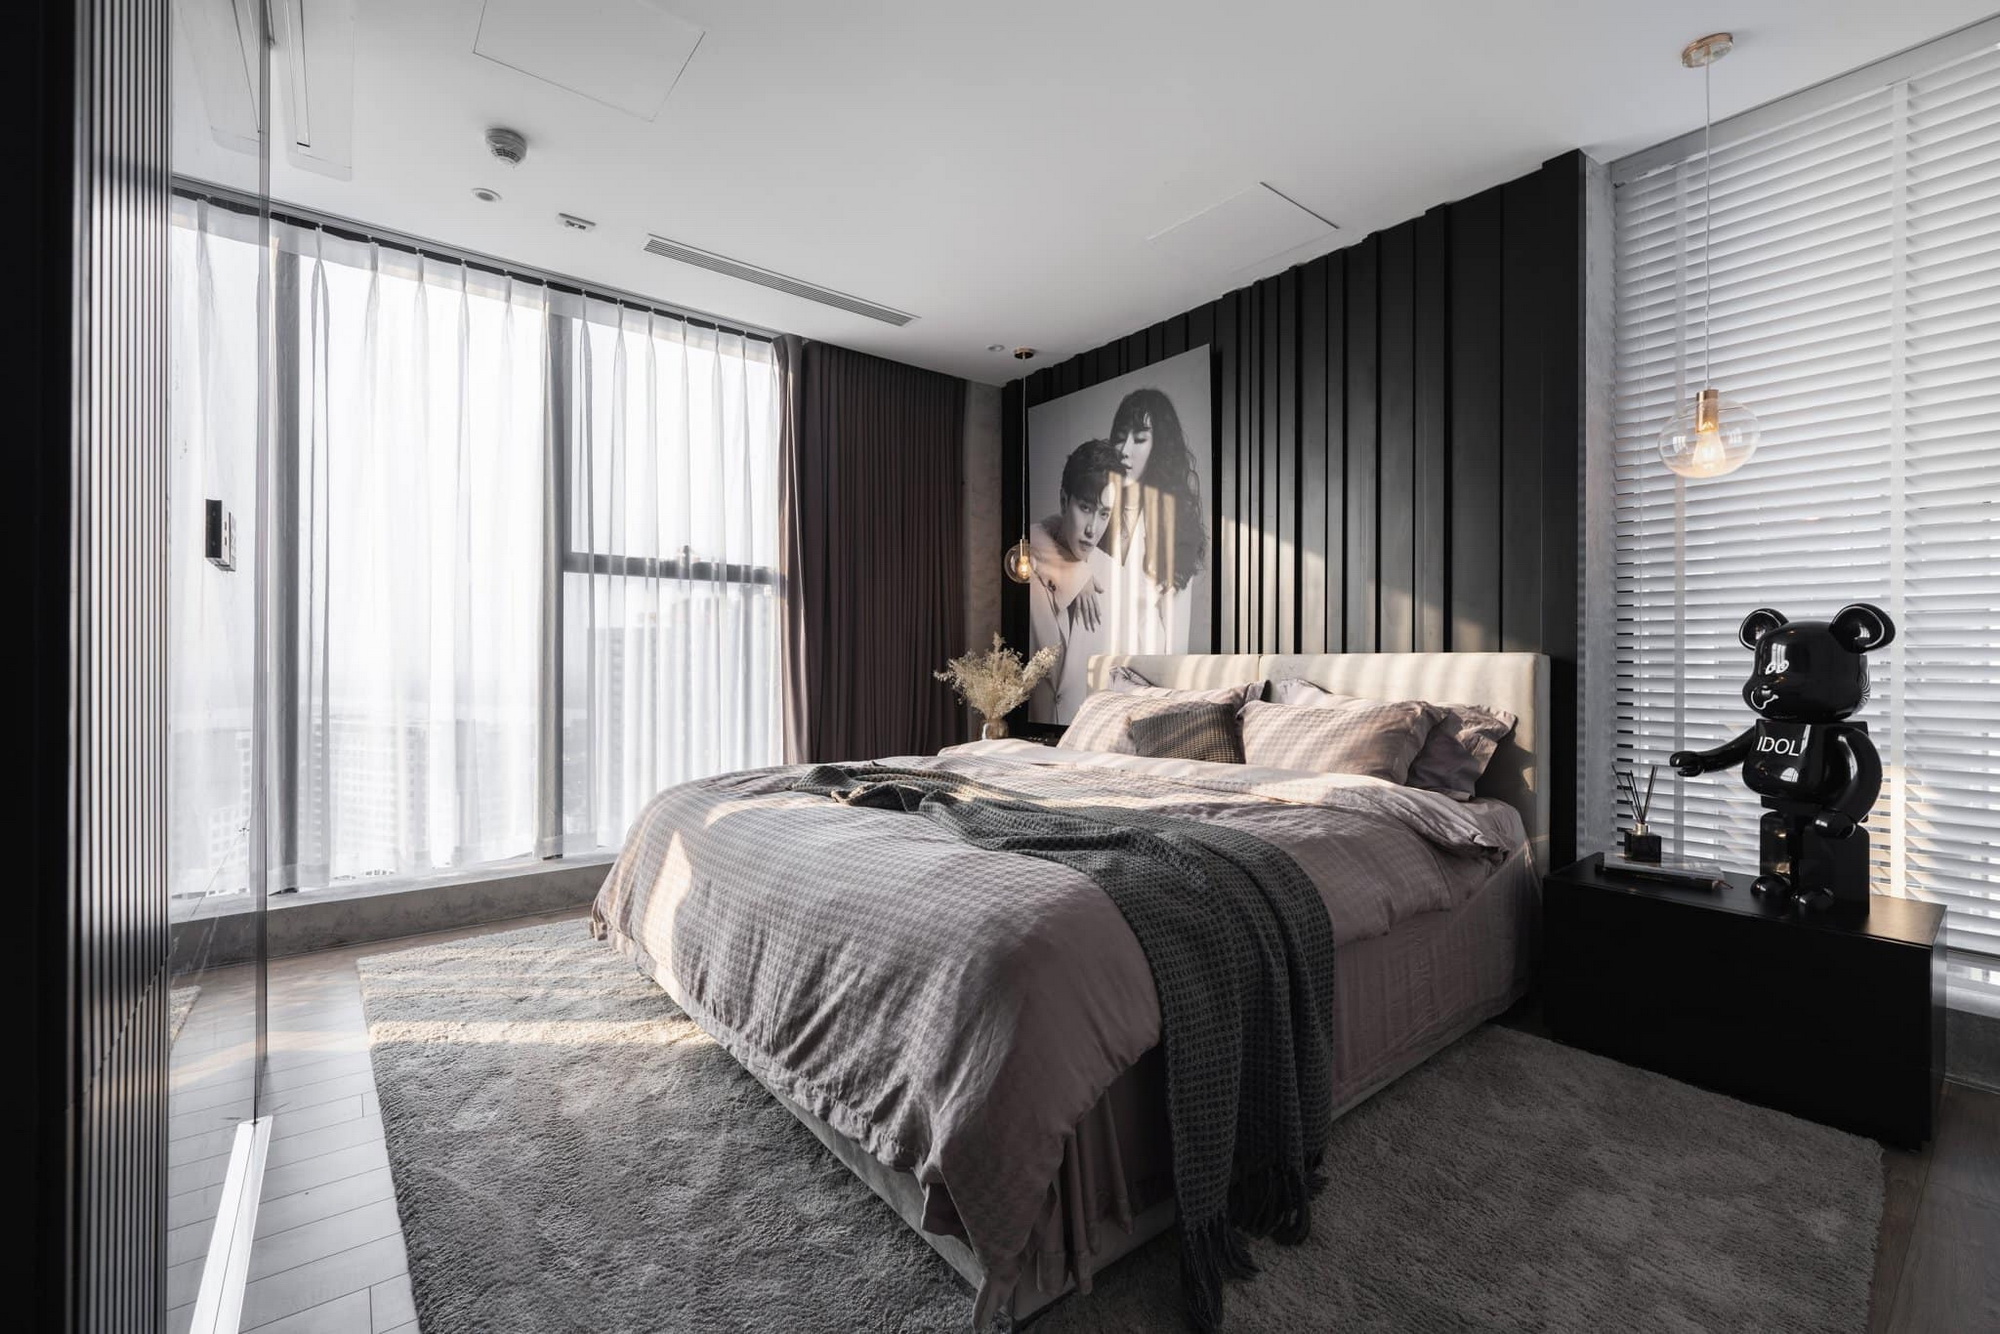 A minimalist bedroom has neutral colors like gray, white, and black, along with a large floor-to-ceiling window to provide needed light. 